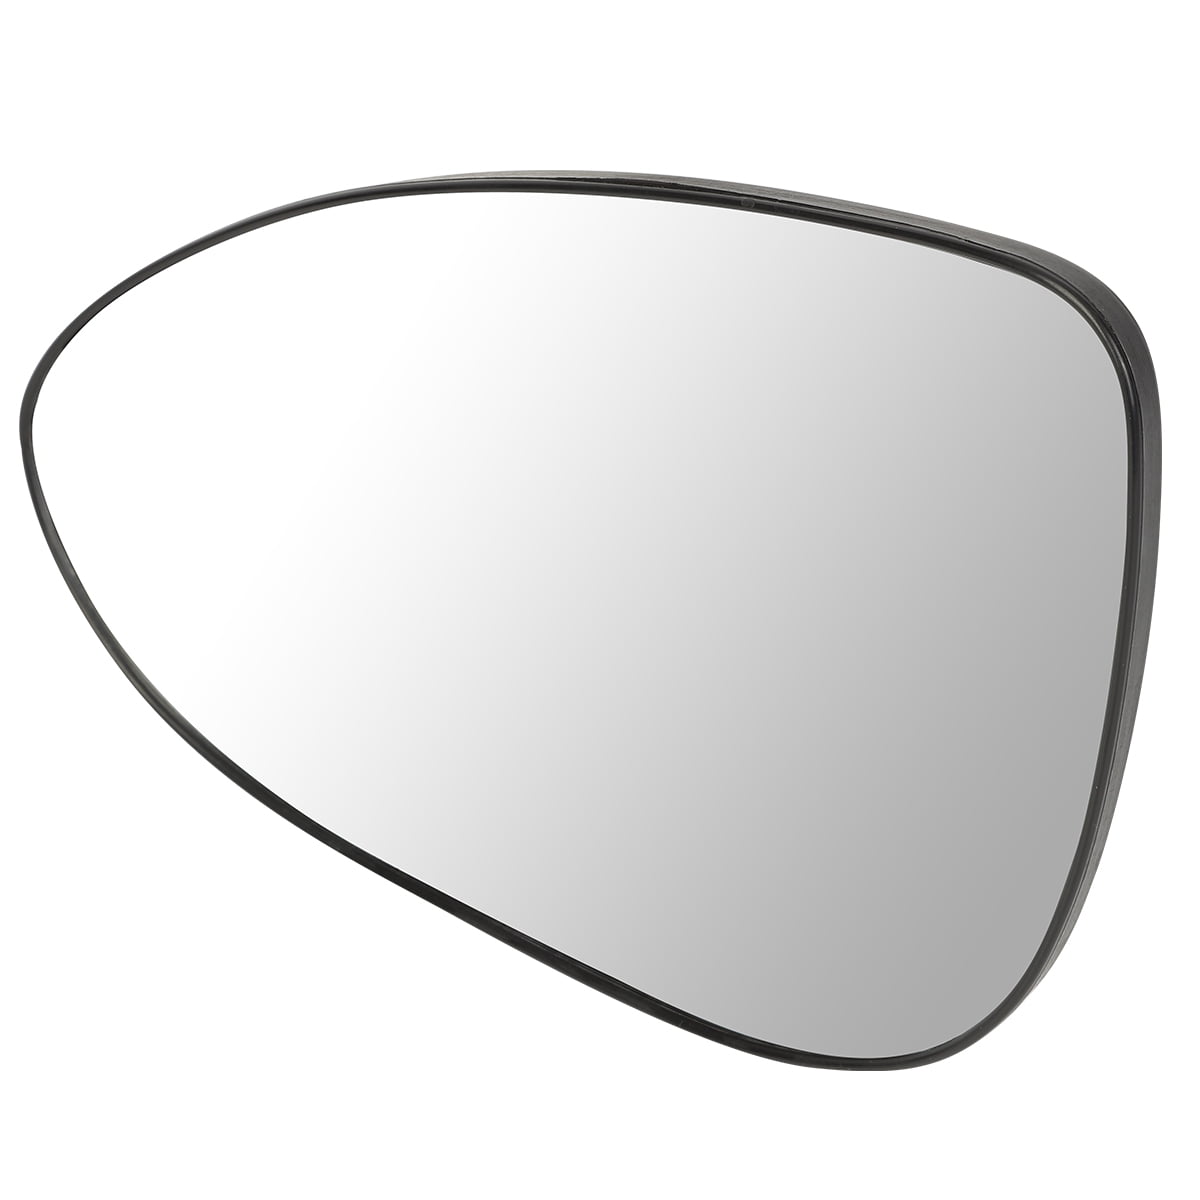 FOR 2012-2019 CHEVY SONIC 1PC FACTORY STYLE SIDE DOOR MIRROR GLASS LENS LEFT LH